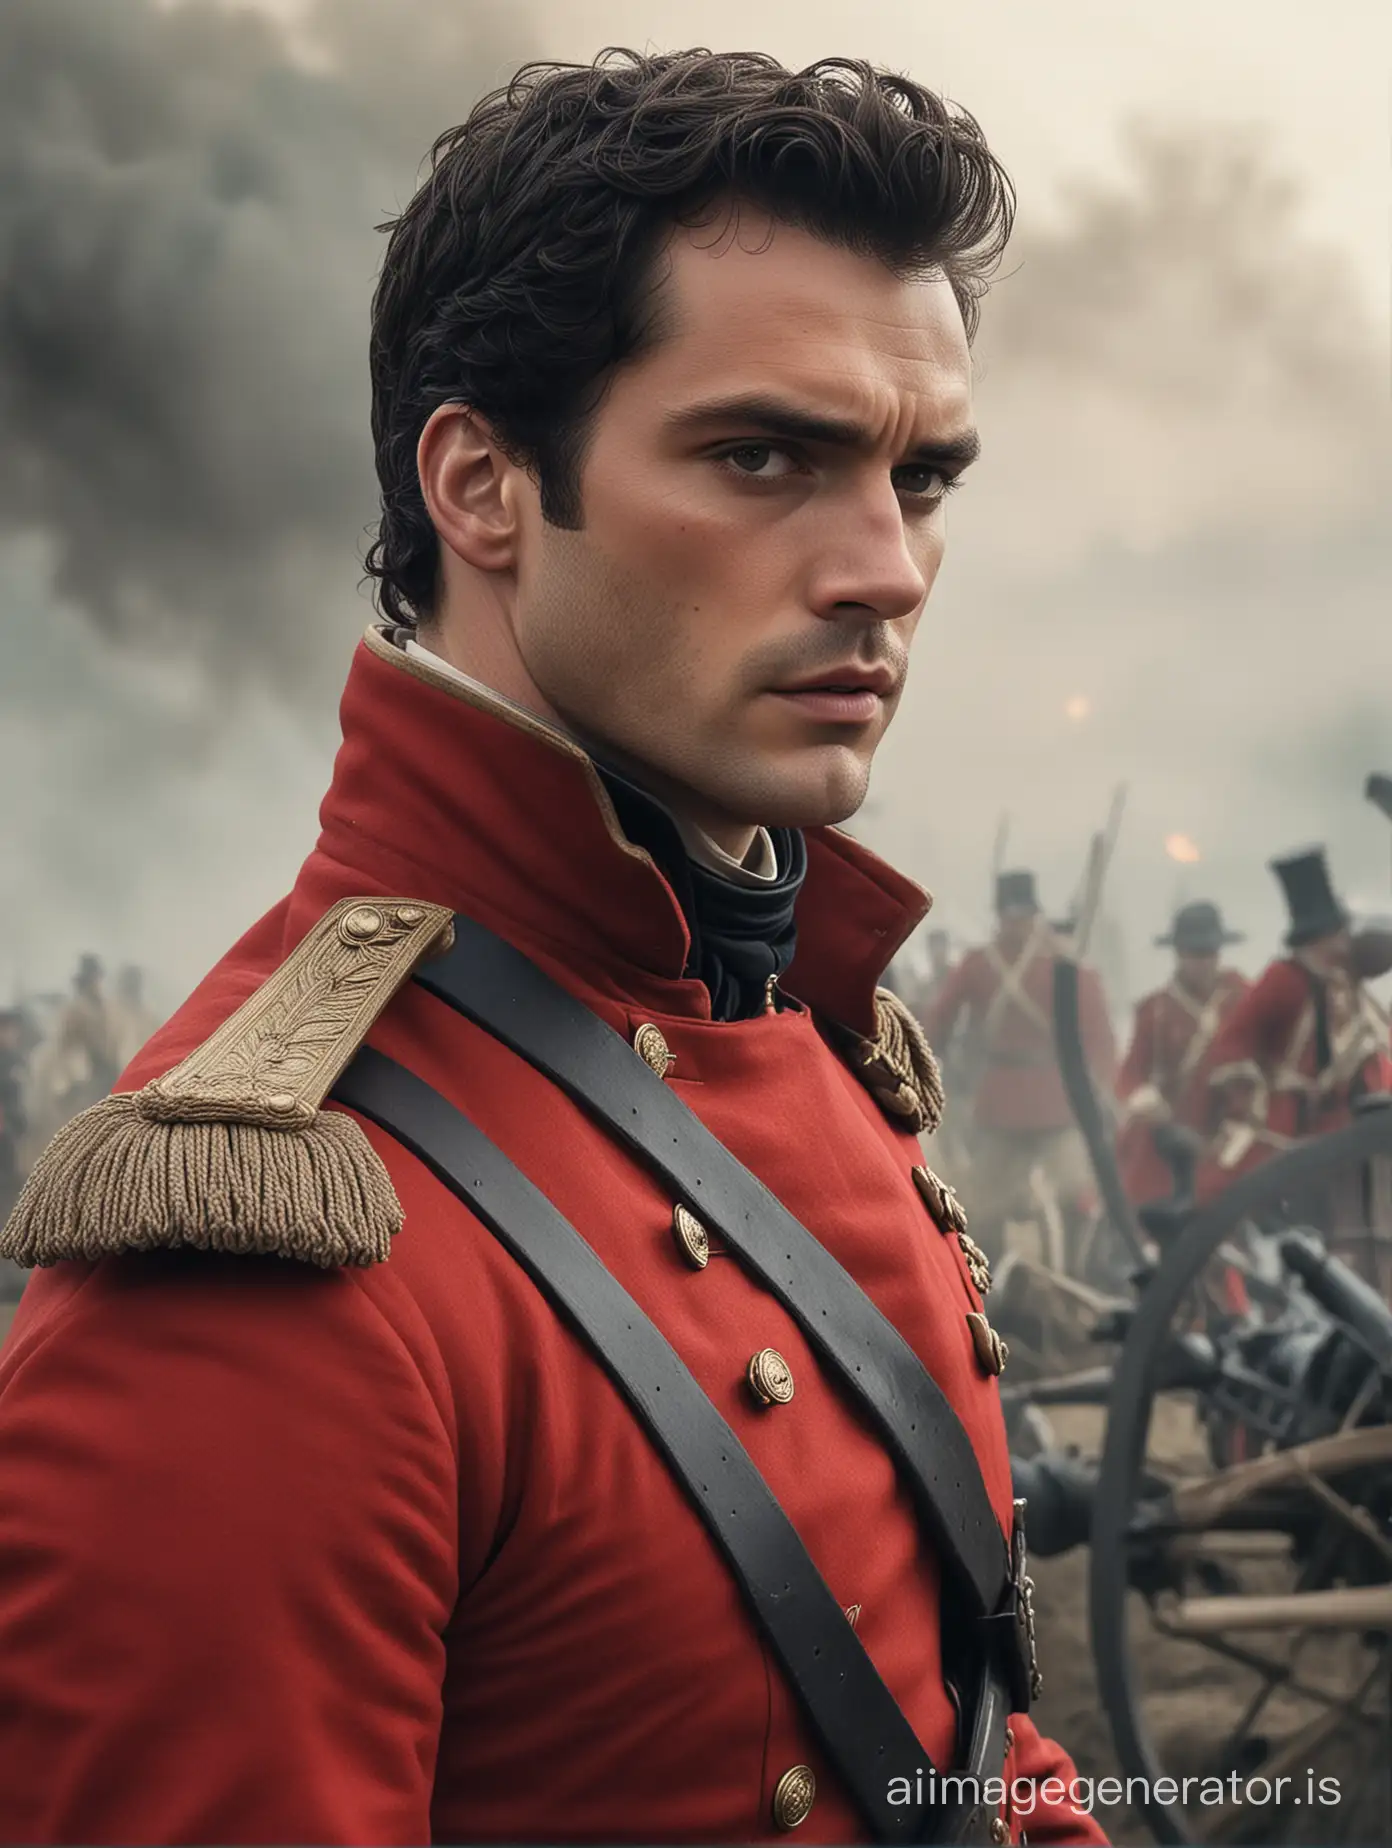 Close-up of a young and handsome English officer in a red coat uniform, without a hat, somewhat resembling actor Henry Cavill in the movie The Cold Light of Day, standing on a battlefield surrounded by cannon smoke, with a distressed expression, a small wound on the face, and wielding a sword, Regency era. Ultra-realistic.